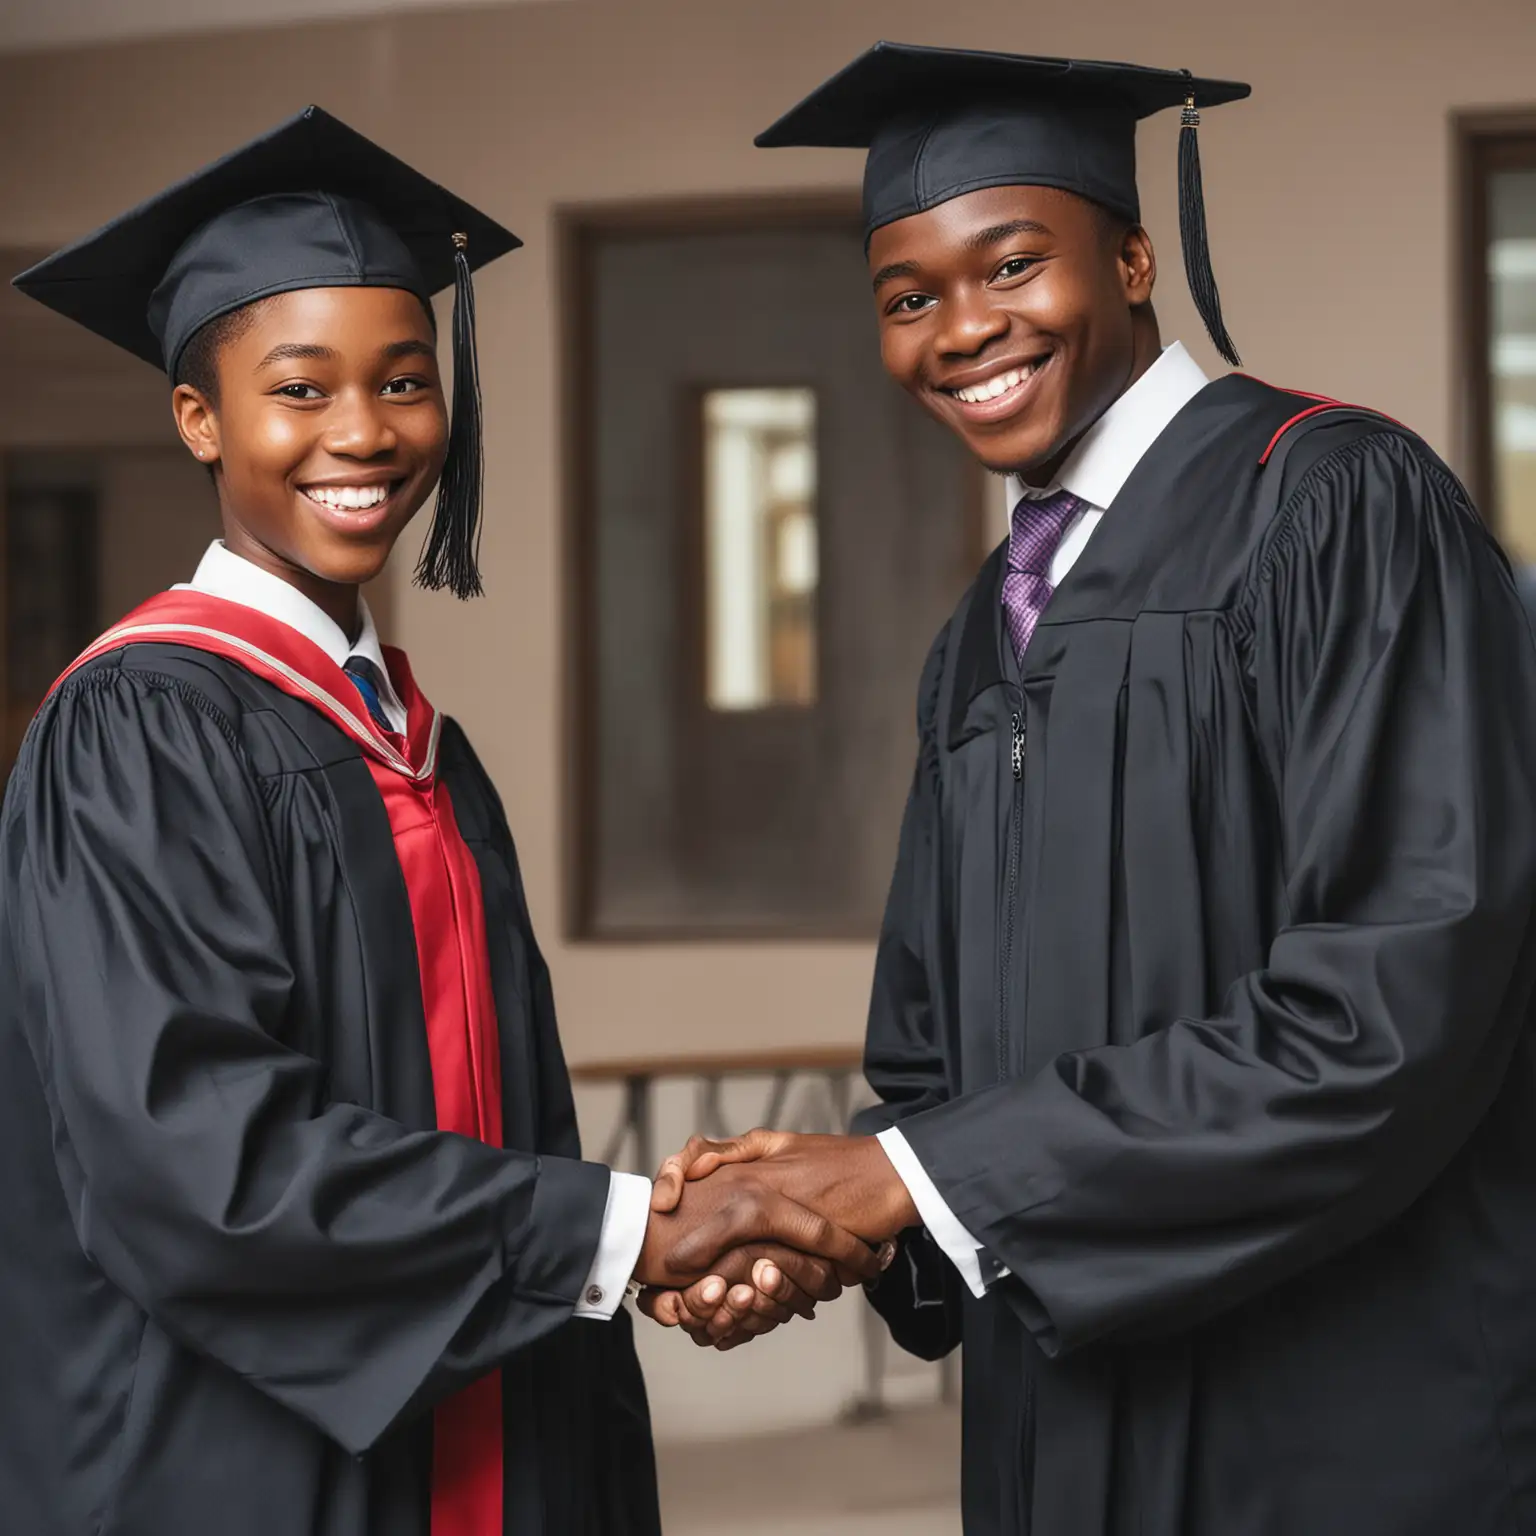 Nigerian Student Graduation Ceremony with Business Person